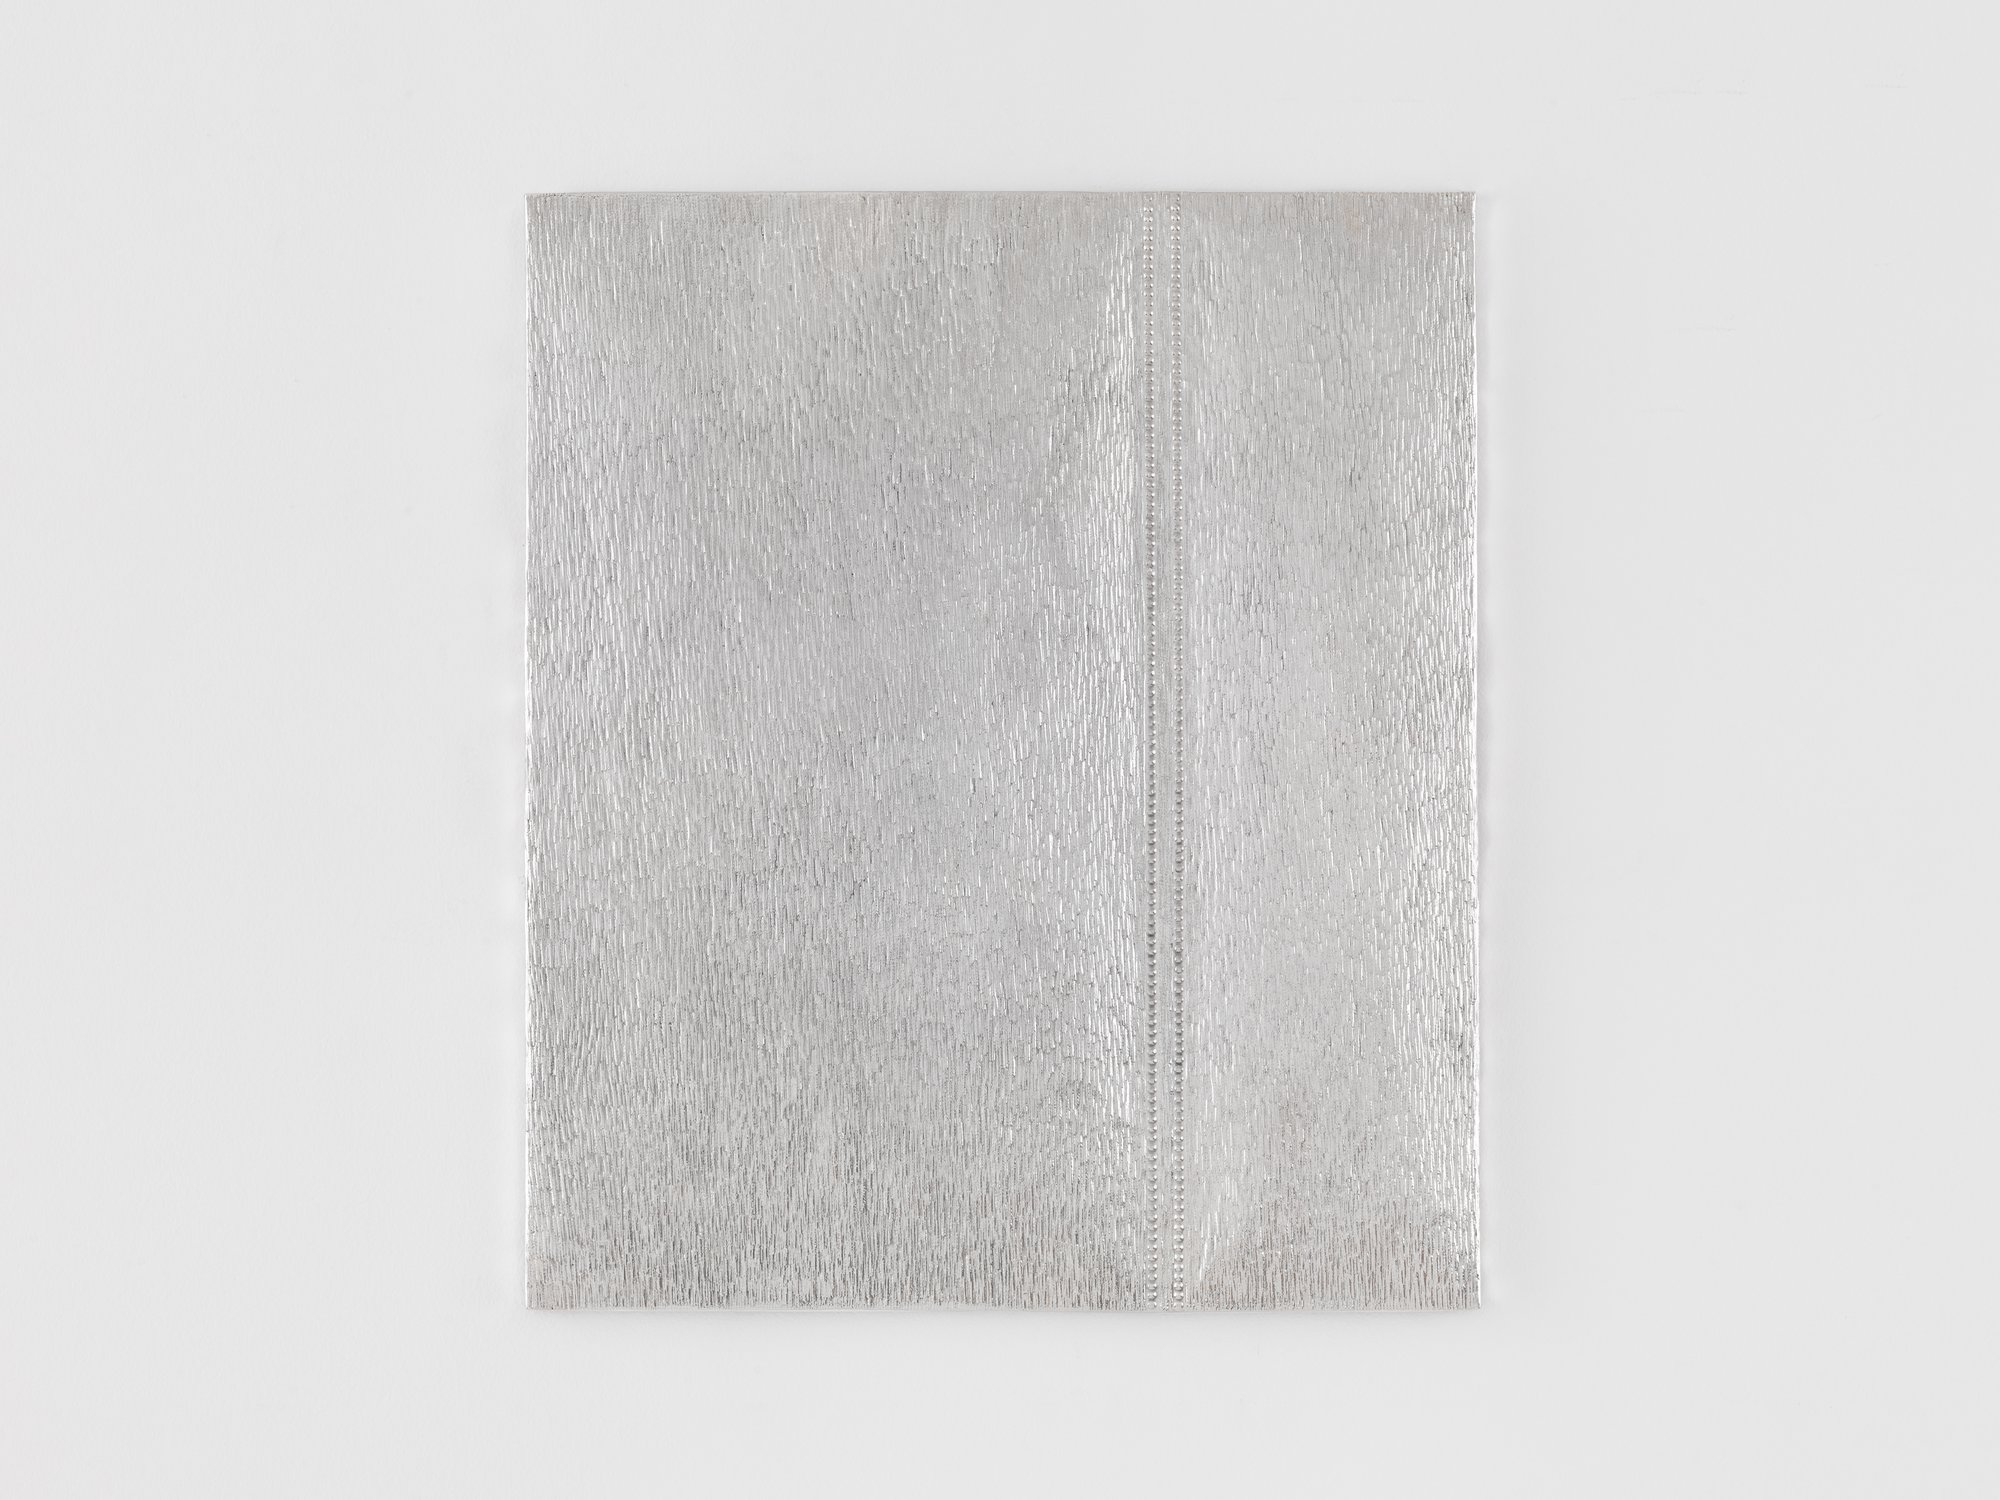 Christodoulos Panayiotou, Untitled, sterling silver repoussé and chased revetment, cast sterling silver nails, wood panel, 74 x 63 cm (29 1/8 x 24 3/4 in), 2020